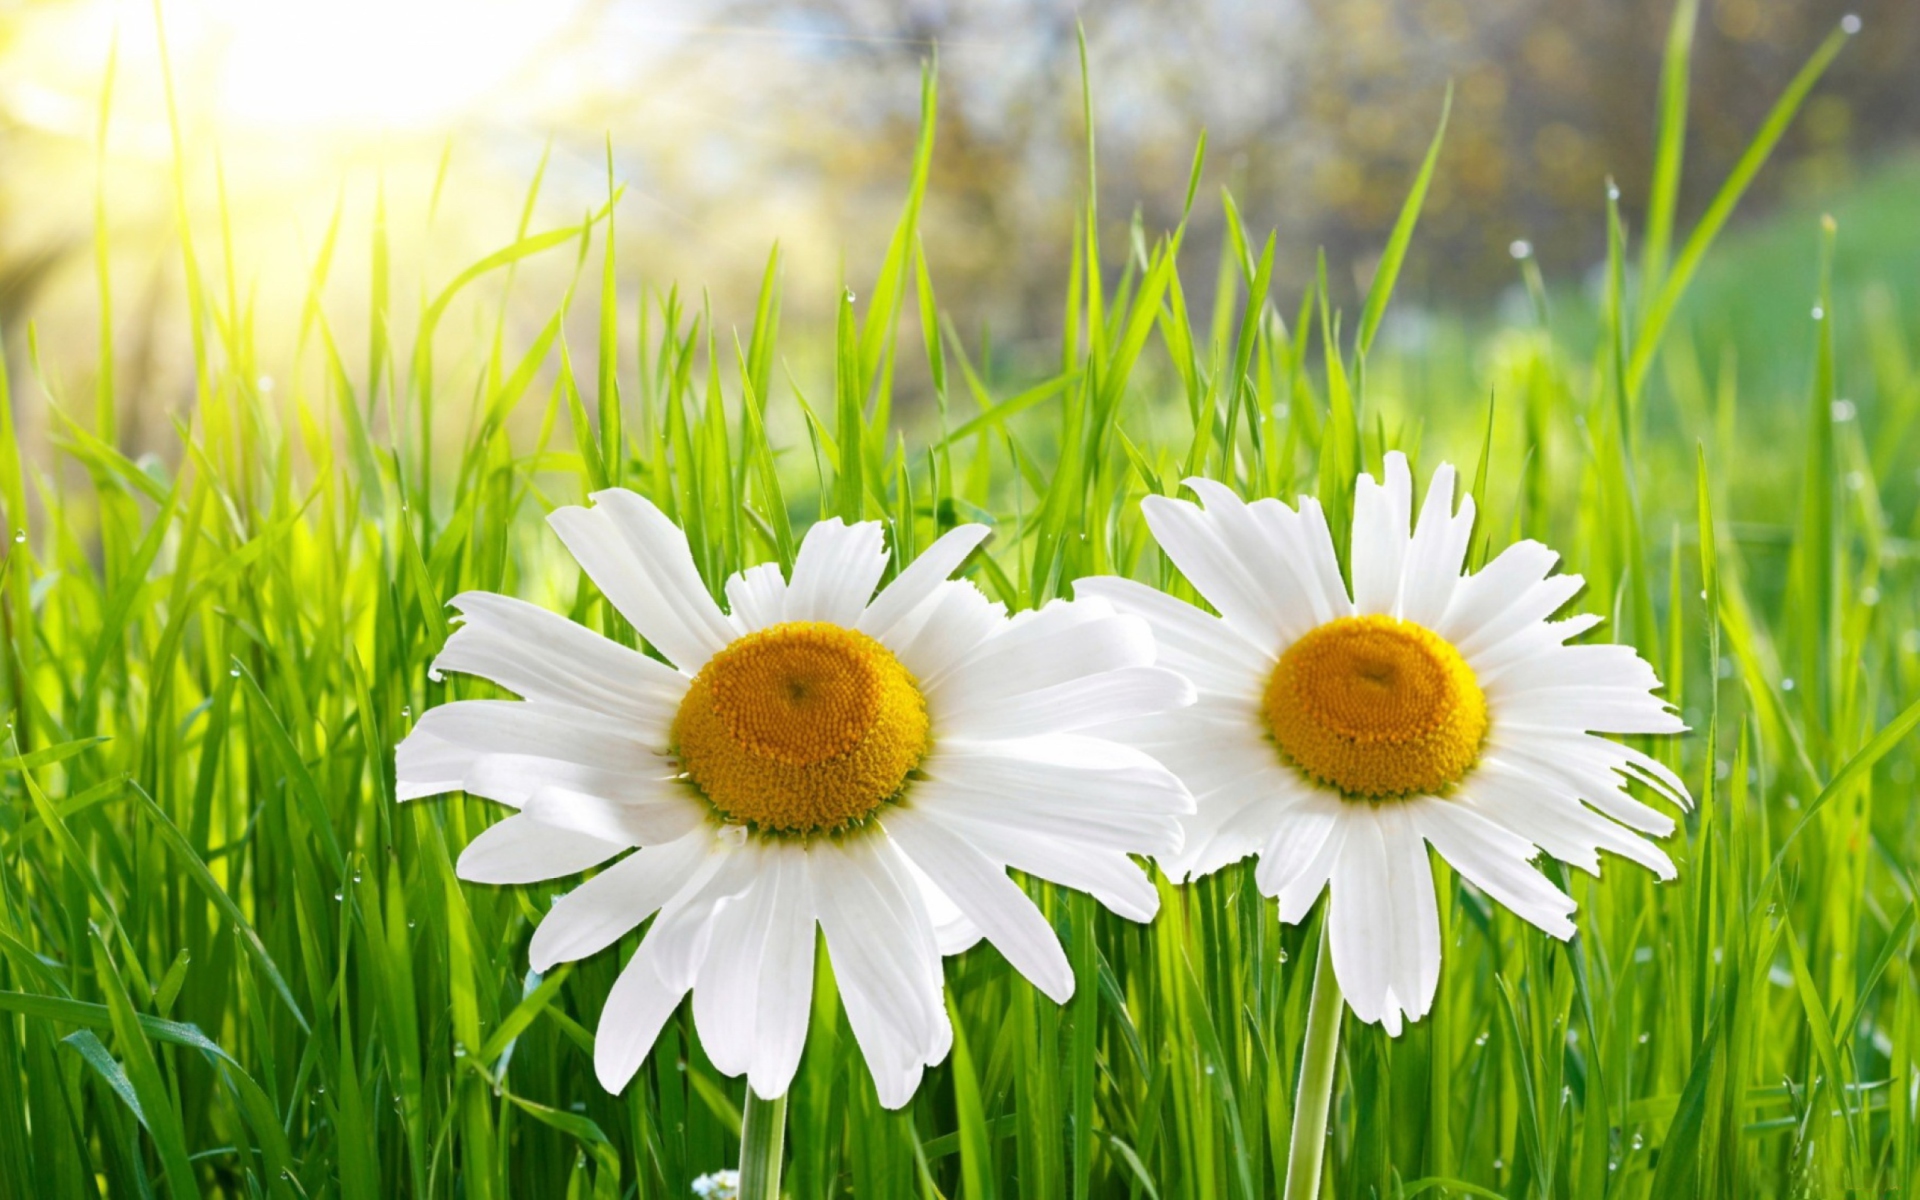 earth, camomile, close up, daisy, flower, grass, white flower, flowers Image for desktop